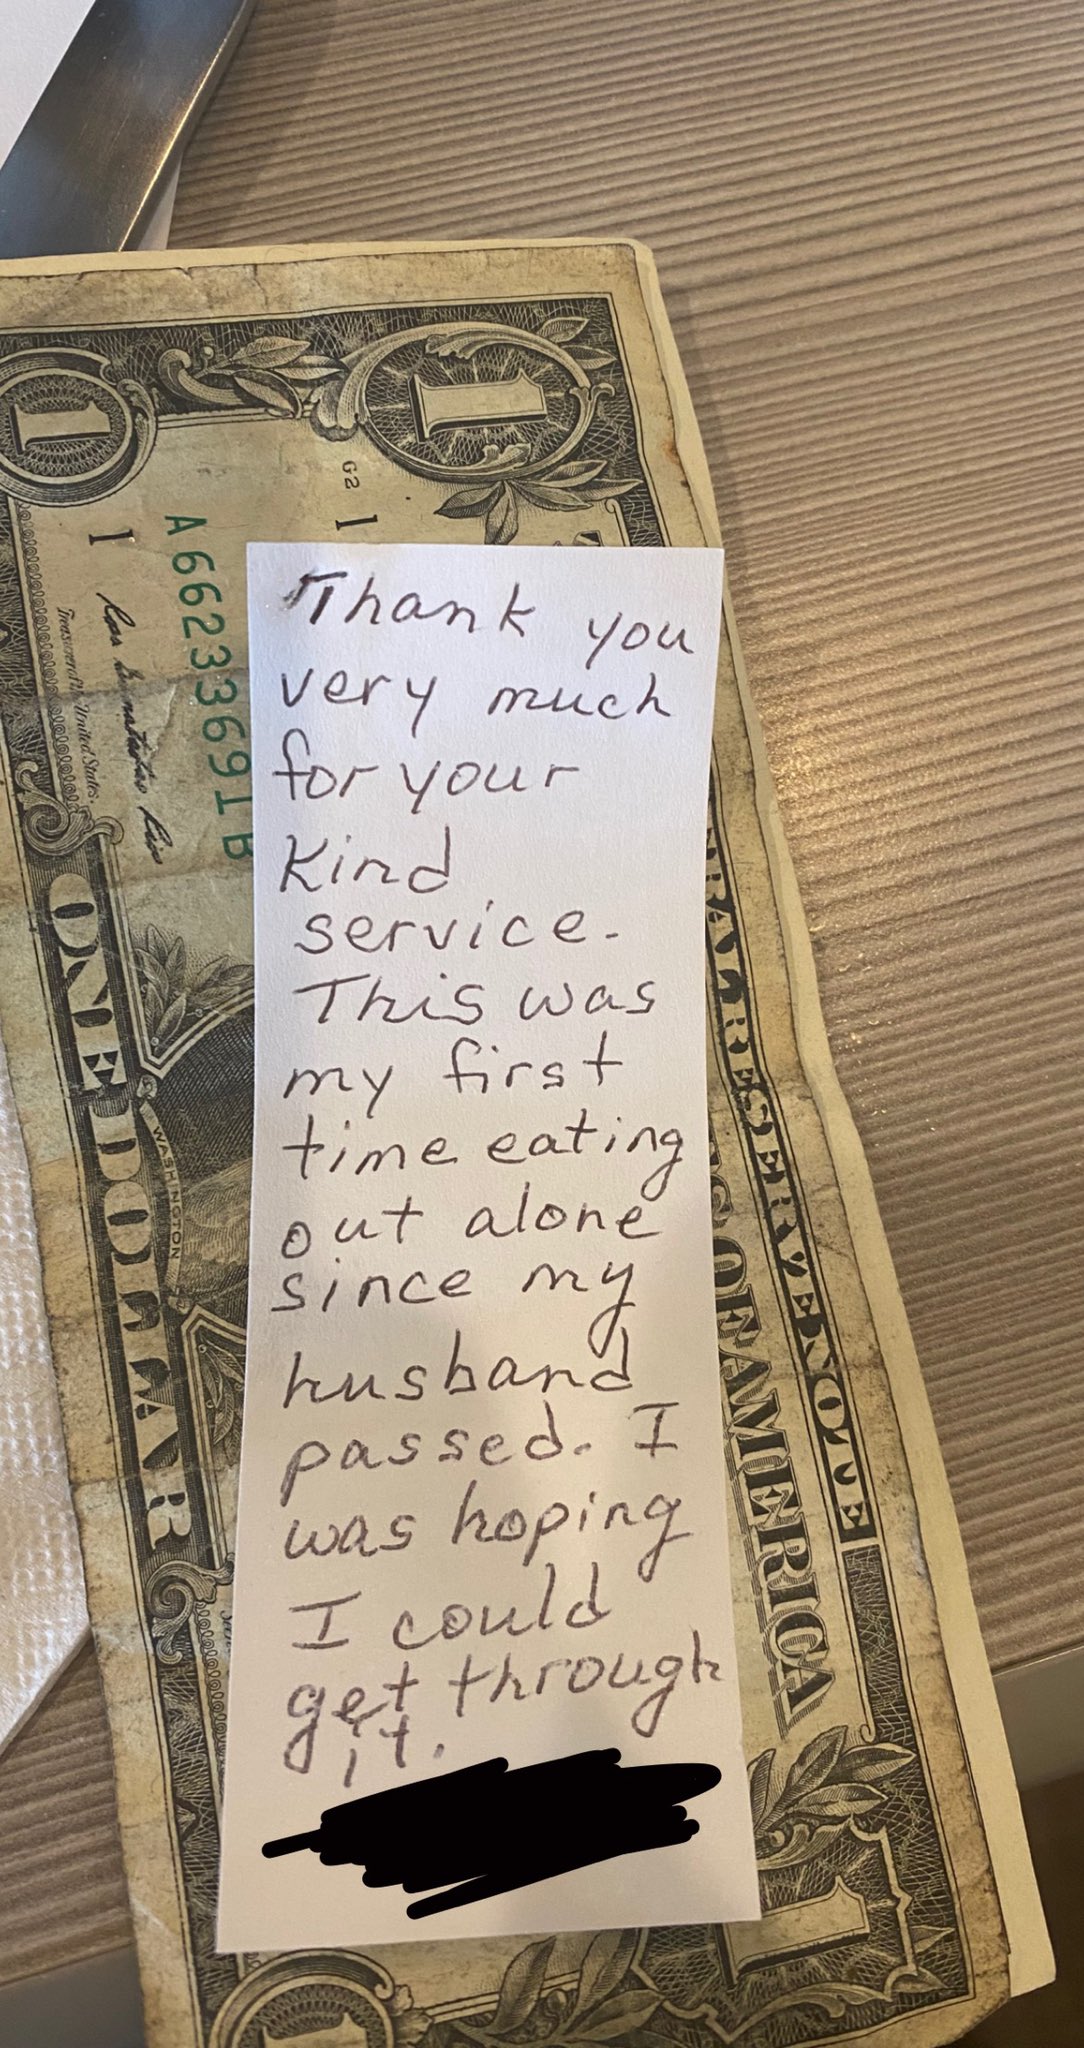 A viral note that was left behind by an elderly woman as a way to thank her kind waitress | Photo: Twitter/alienpopstarr